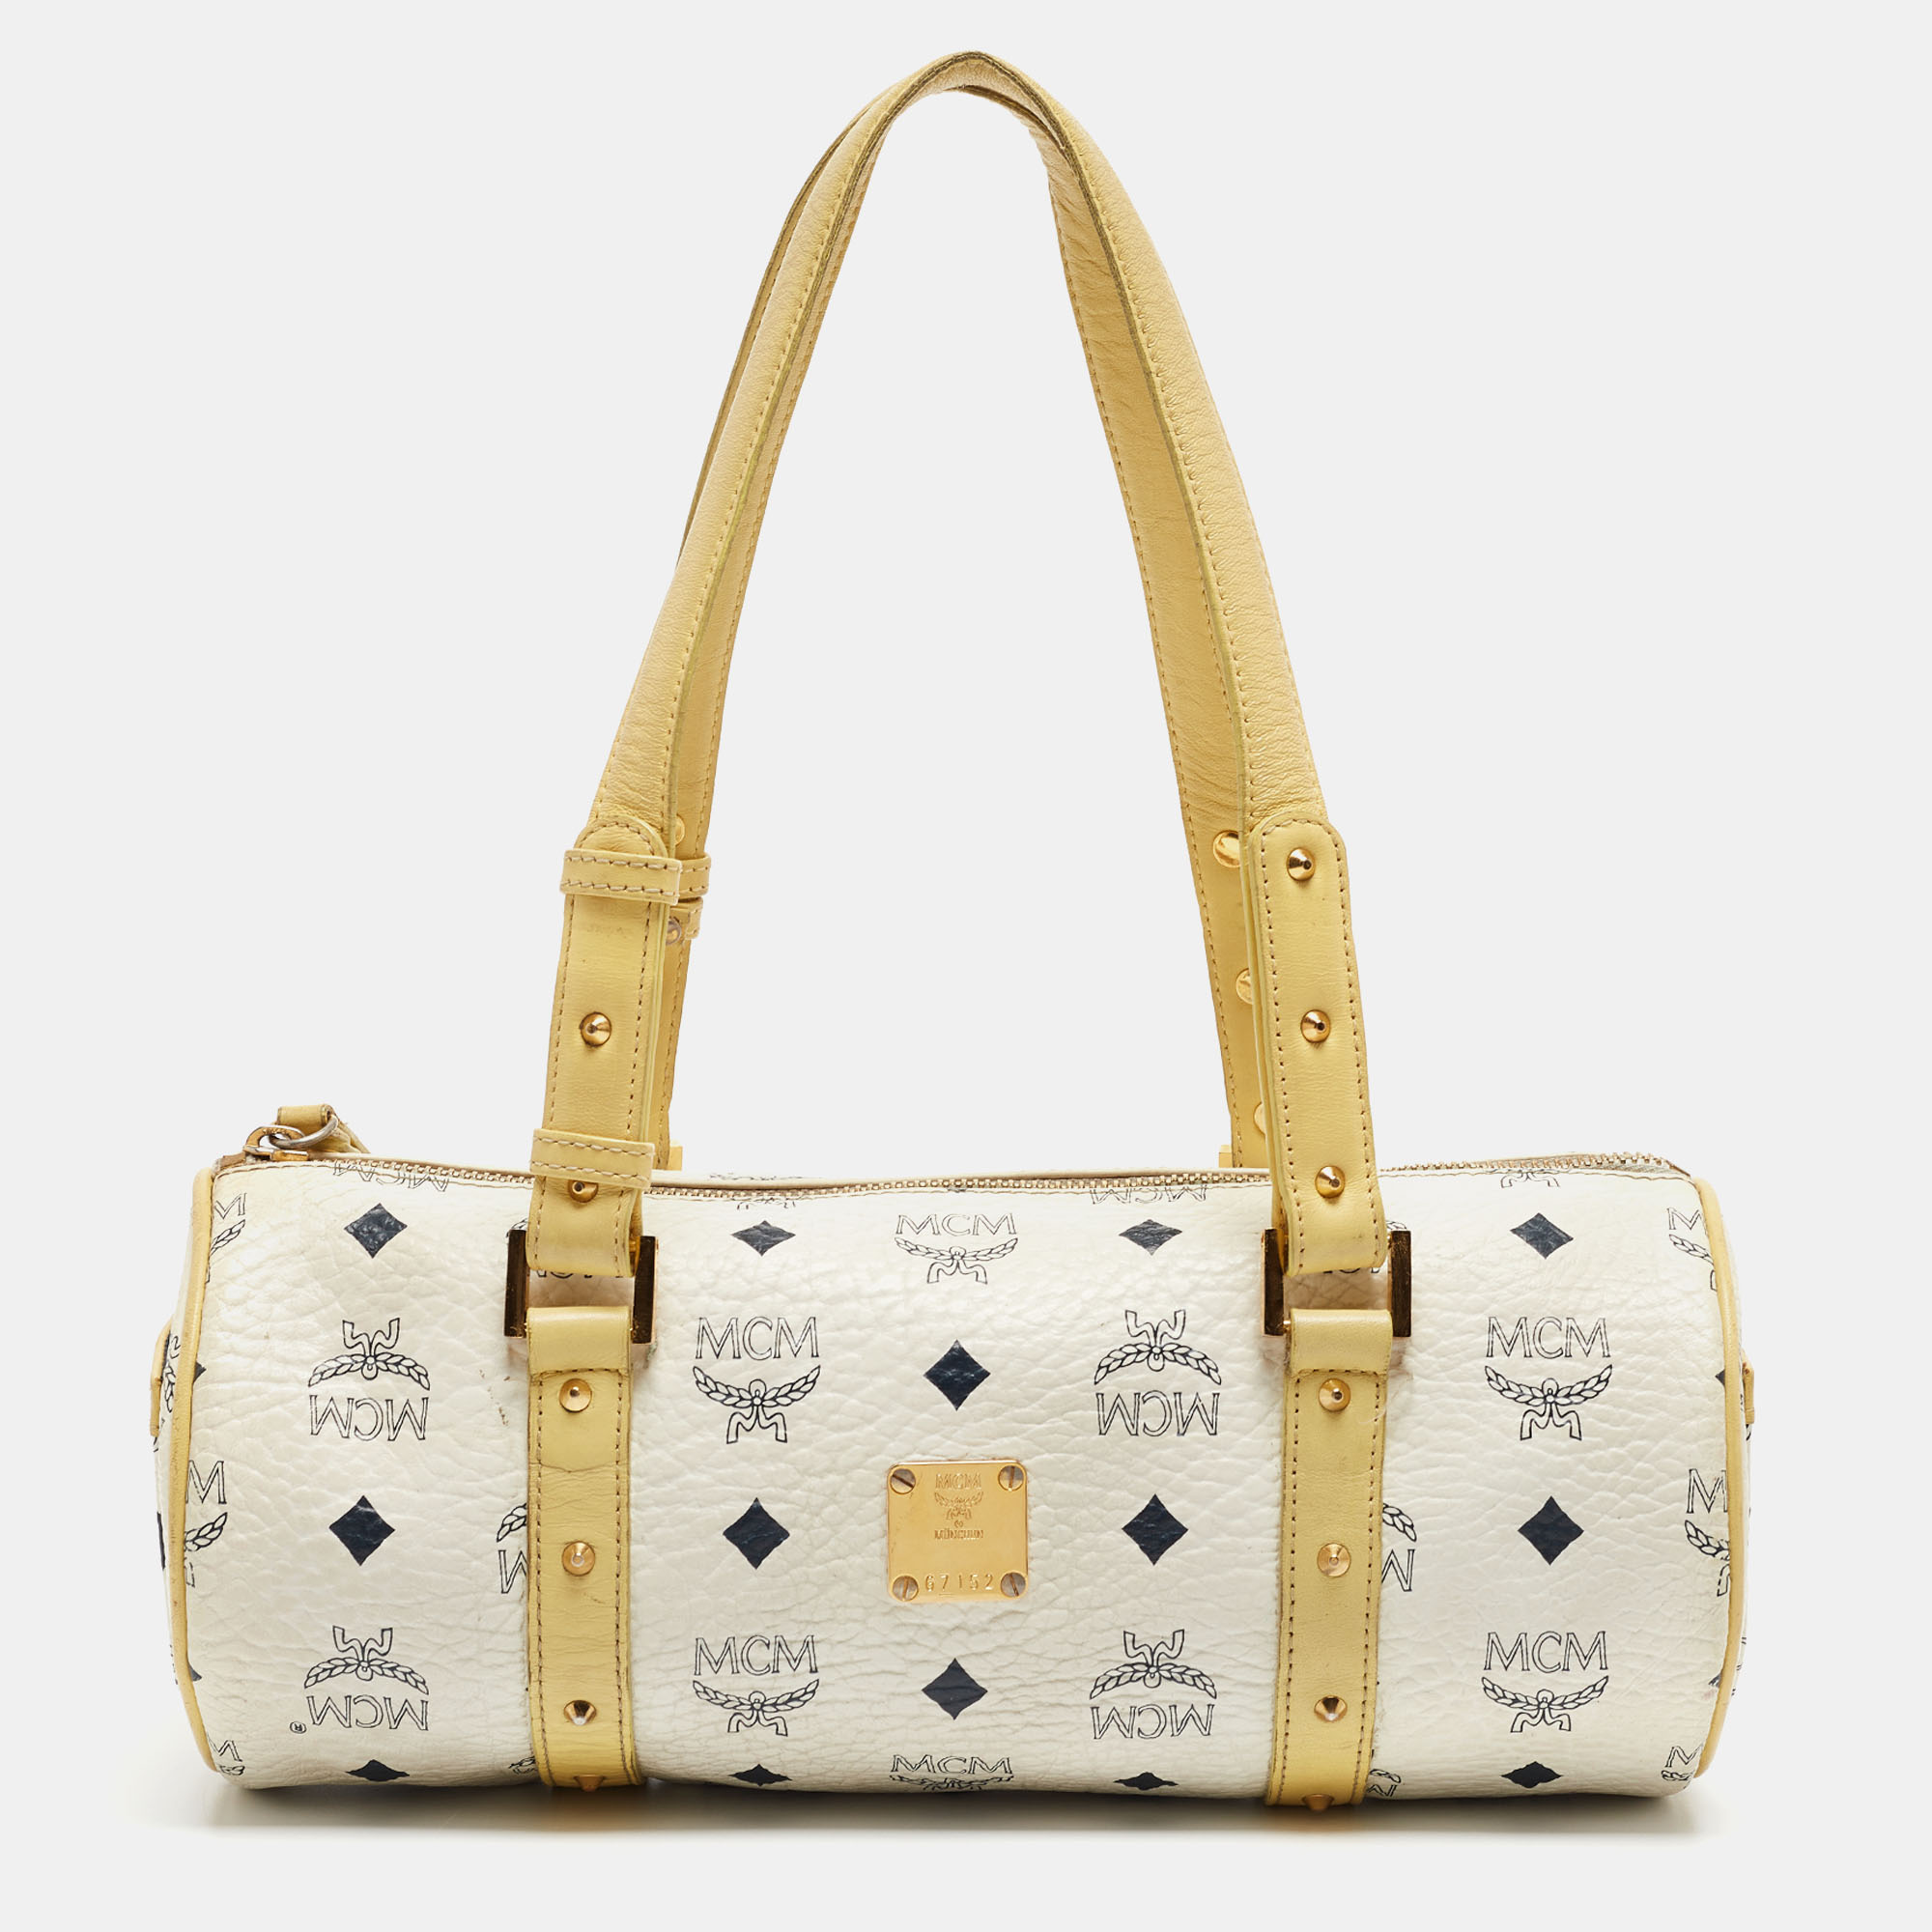 Indulge in timeless luxury with this MCM bag. Meticulously crafted this iconic piece combines heritage elegance and craftsmanship elevating your style to a level of unmatched sophistication.